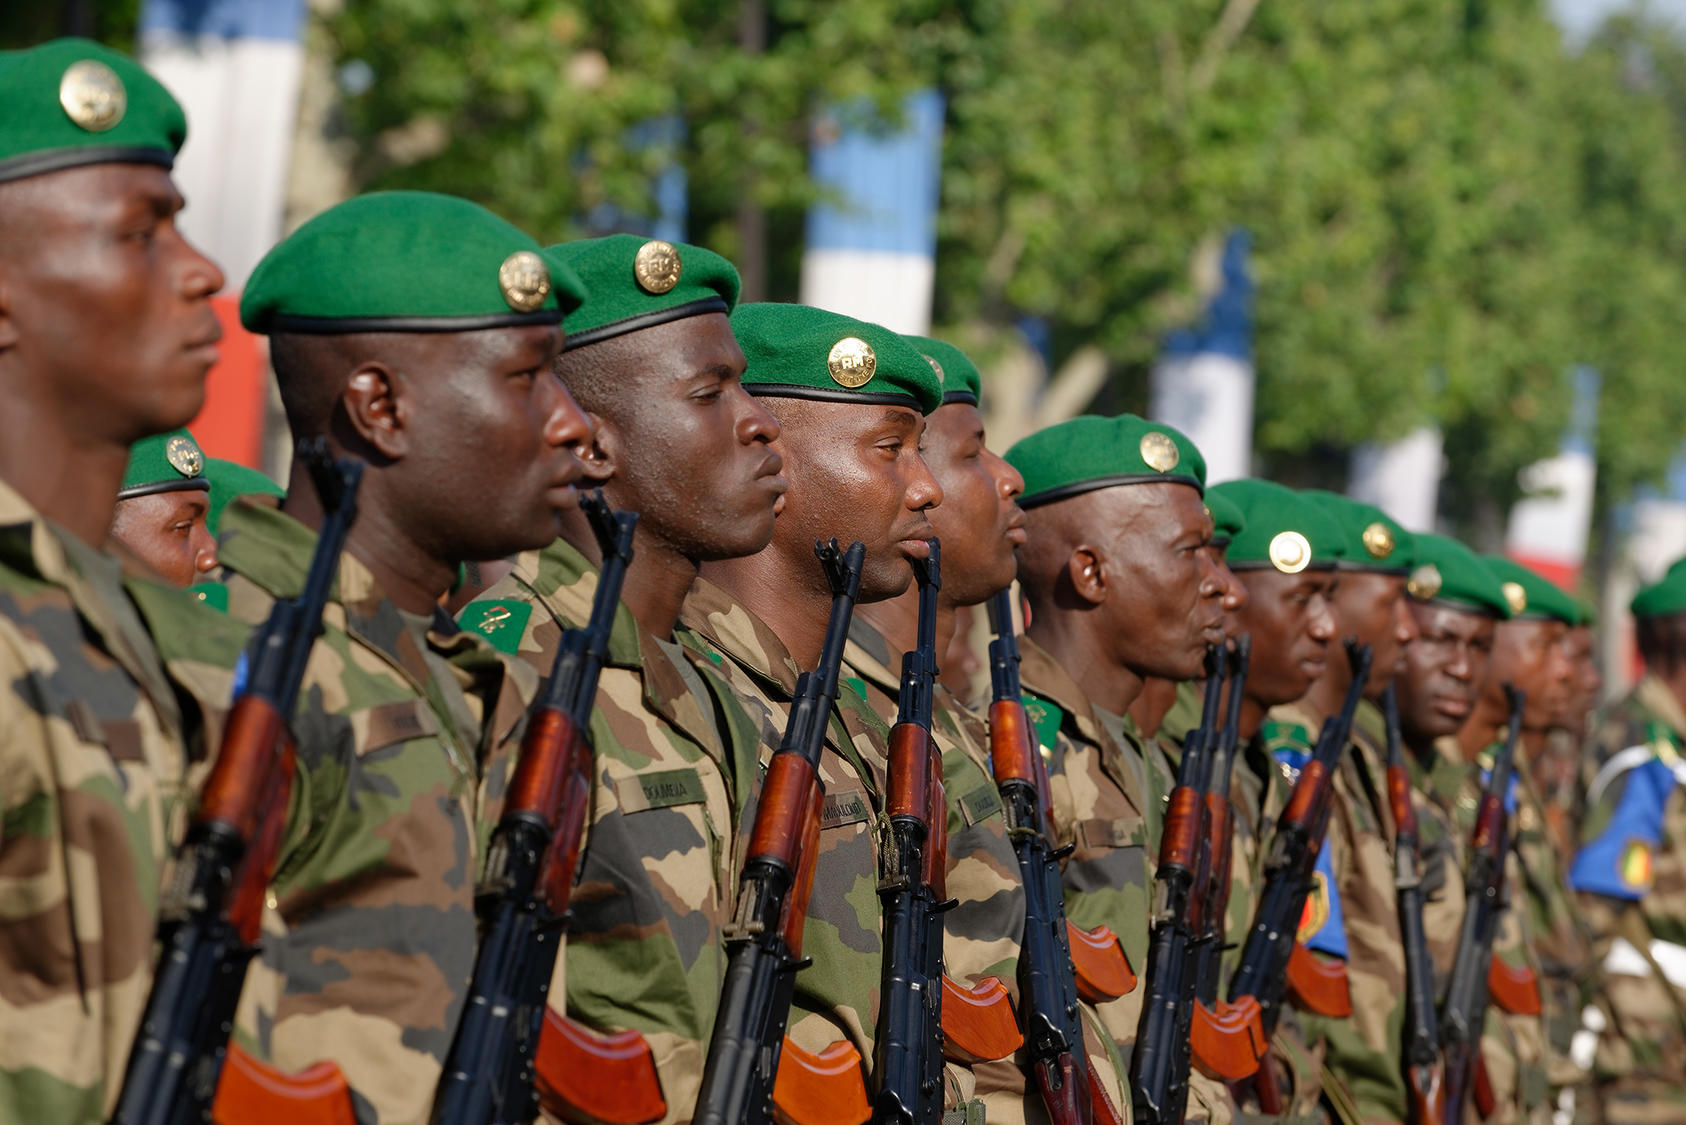 Malian troops taking part in the Bastille Day 2013 military parade on the Champs-Élysées in Paris. Since August 2020, Mali’s military has overthrown two civilian-led governments. (Marie-Lan Nguyen/Wikimedia Commons/CC-BY 2.5]